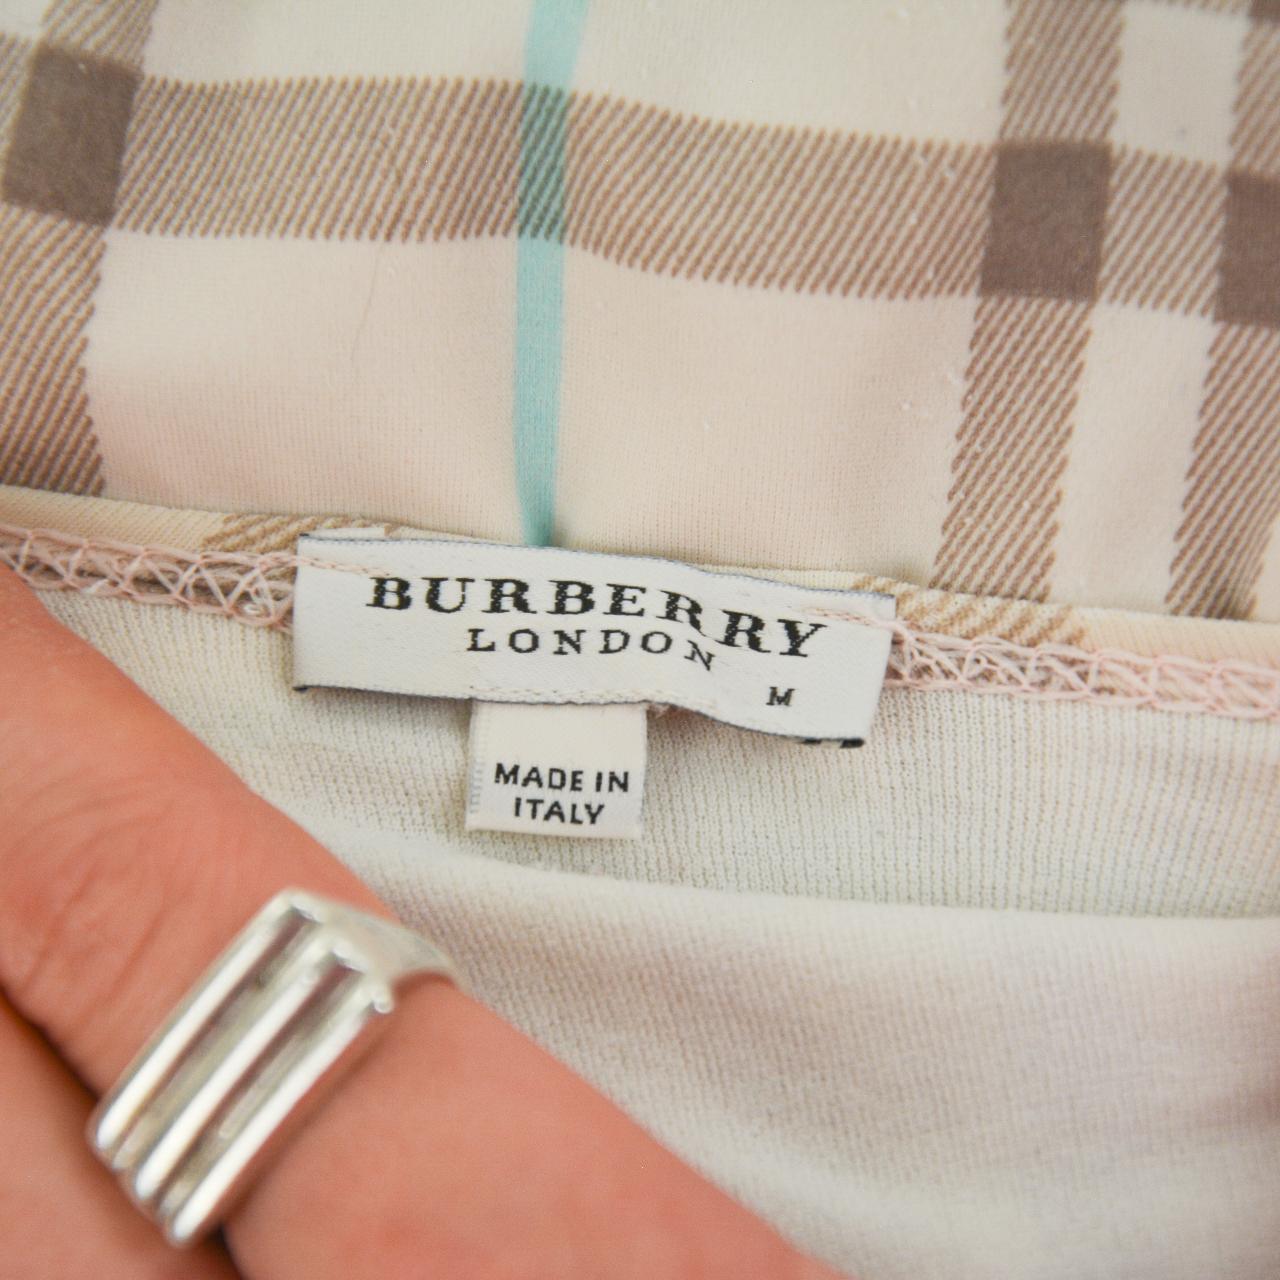 Vintage Burberry Swimming Costume Size M - Known Source